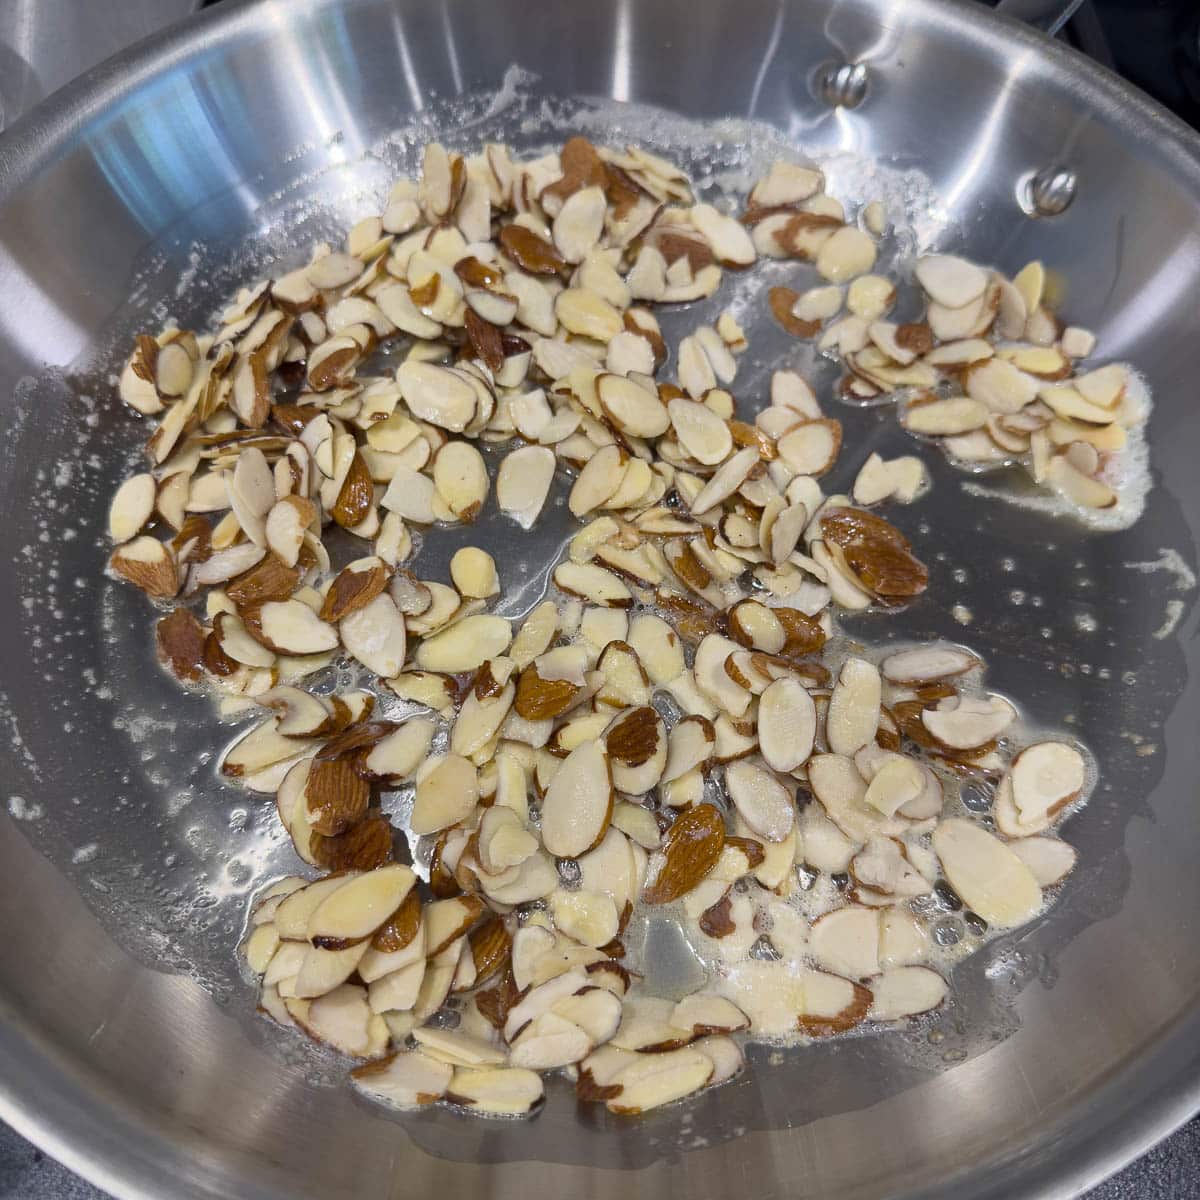 Starting to toast almonds in butter on the stove top.